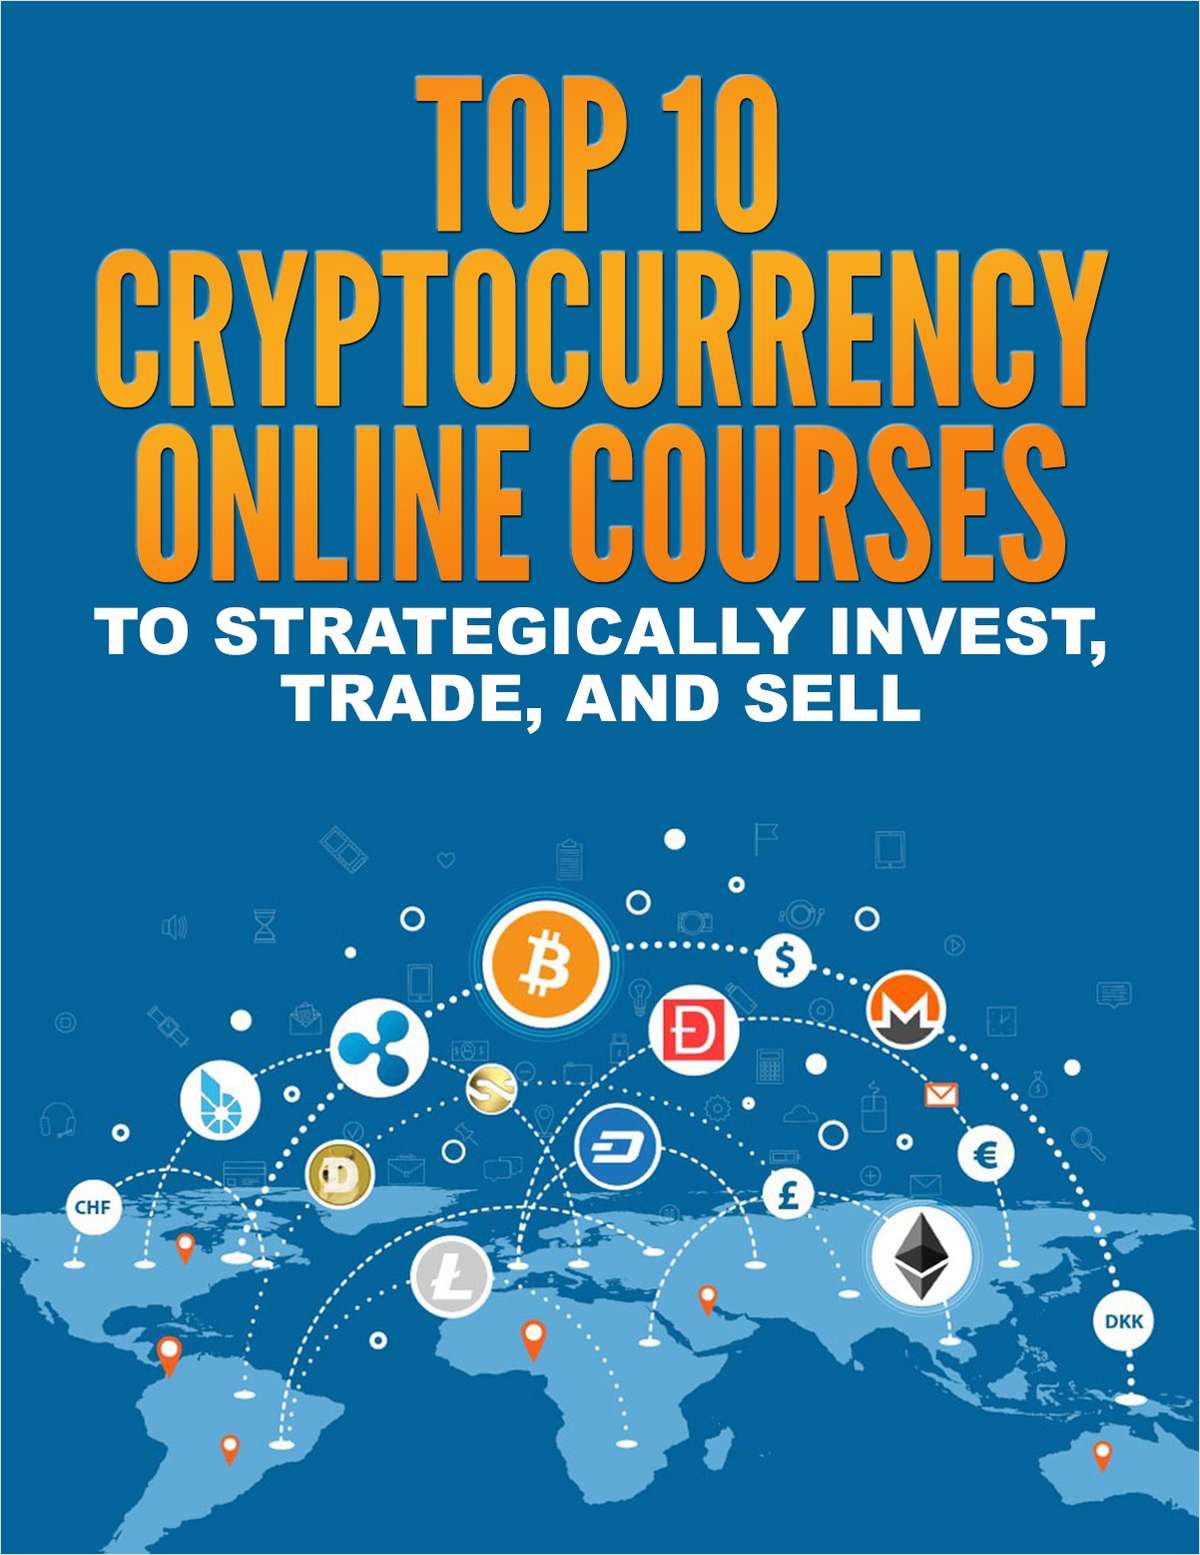 Top 10 Cryptocurrency Online Courses to Strategically Invest, Trade, and Sell